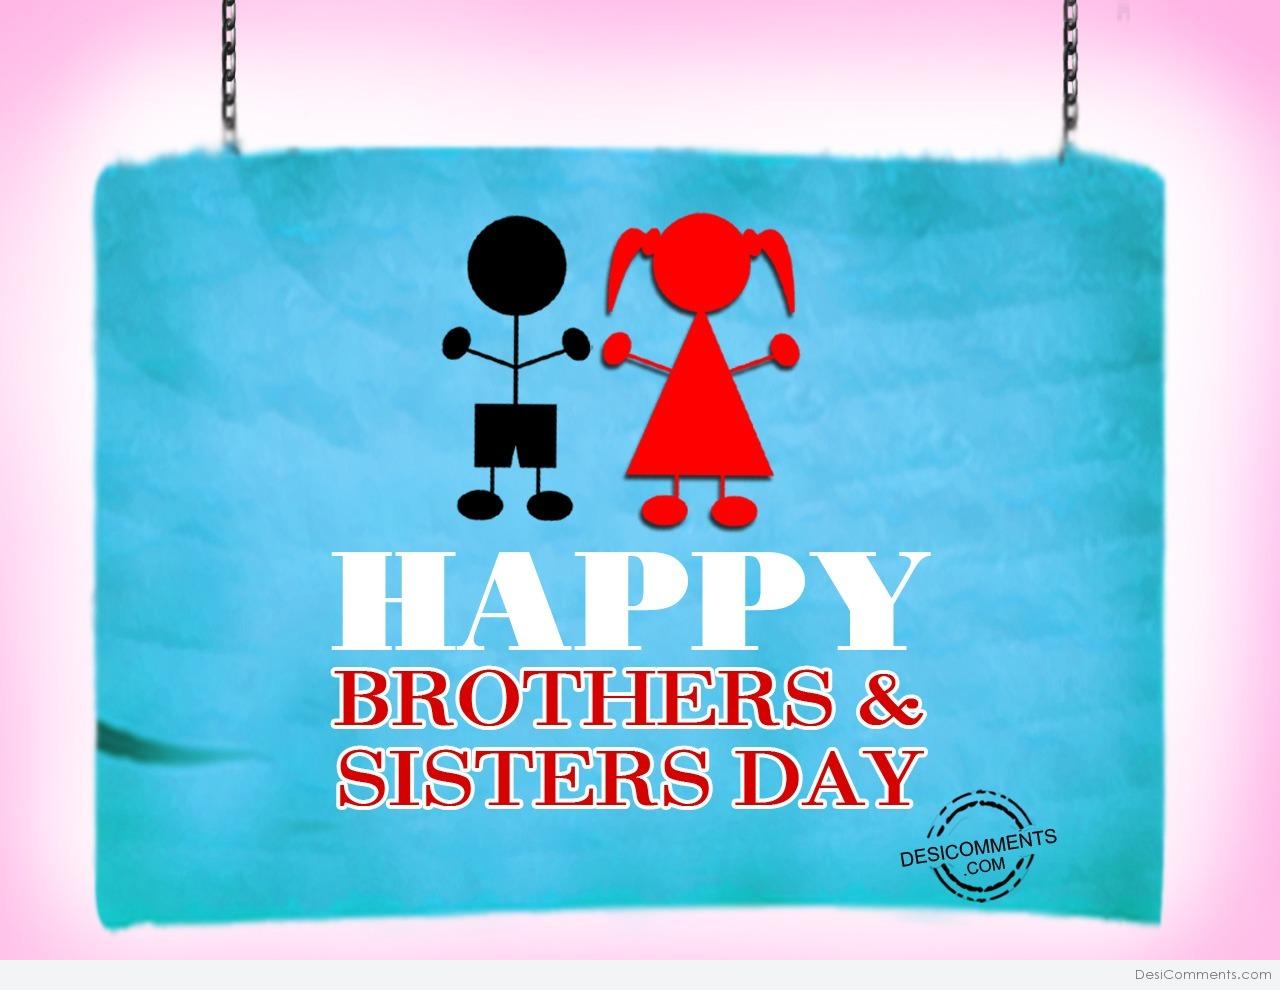 Brother and sister перевод. Brothers and sisters Day. Sister Day. Happy brothers and sisters Day. Brothers and sisters магазин.